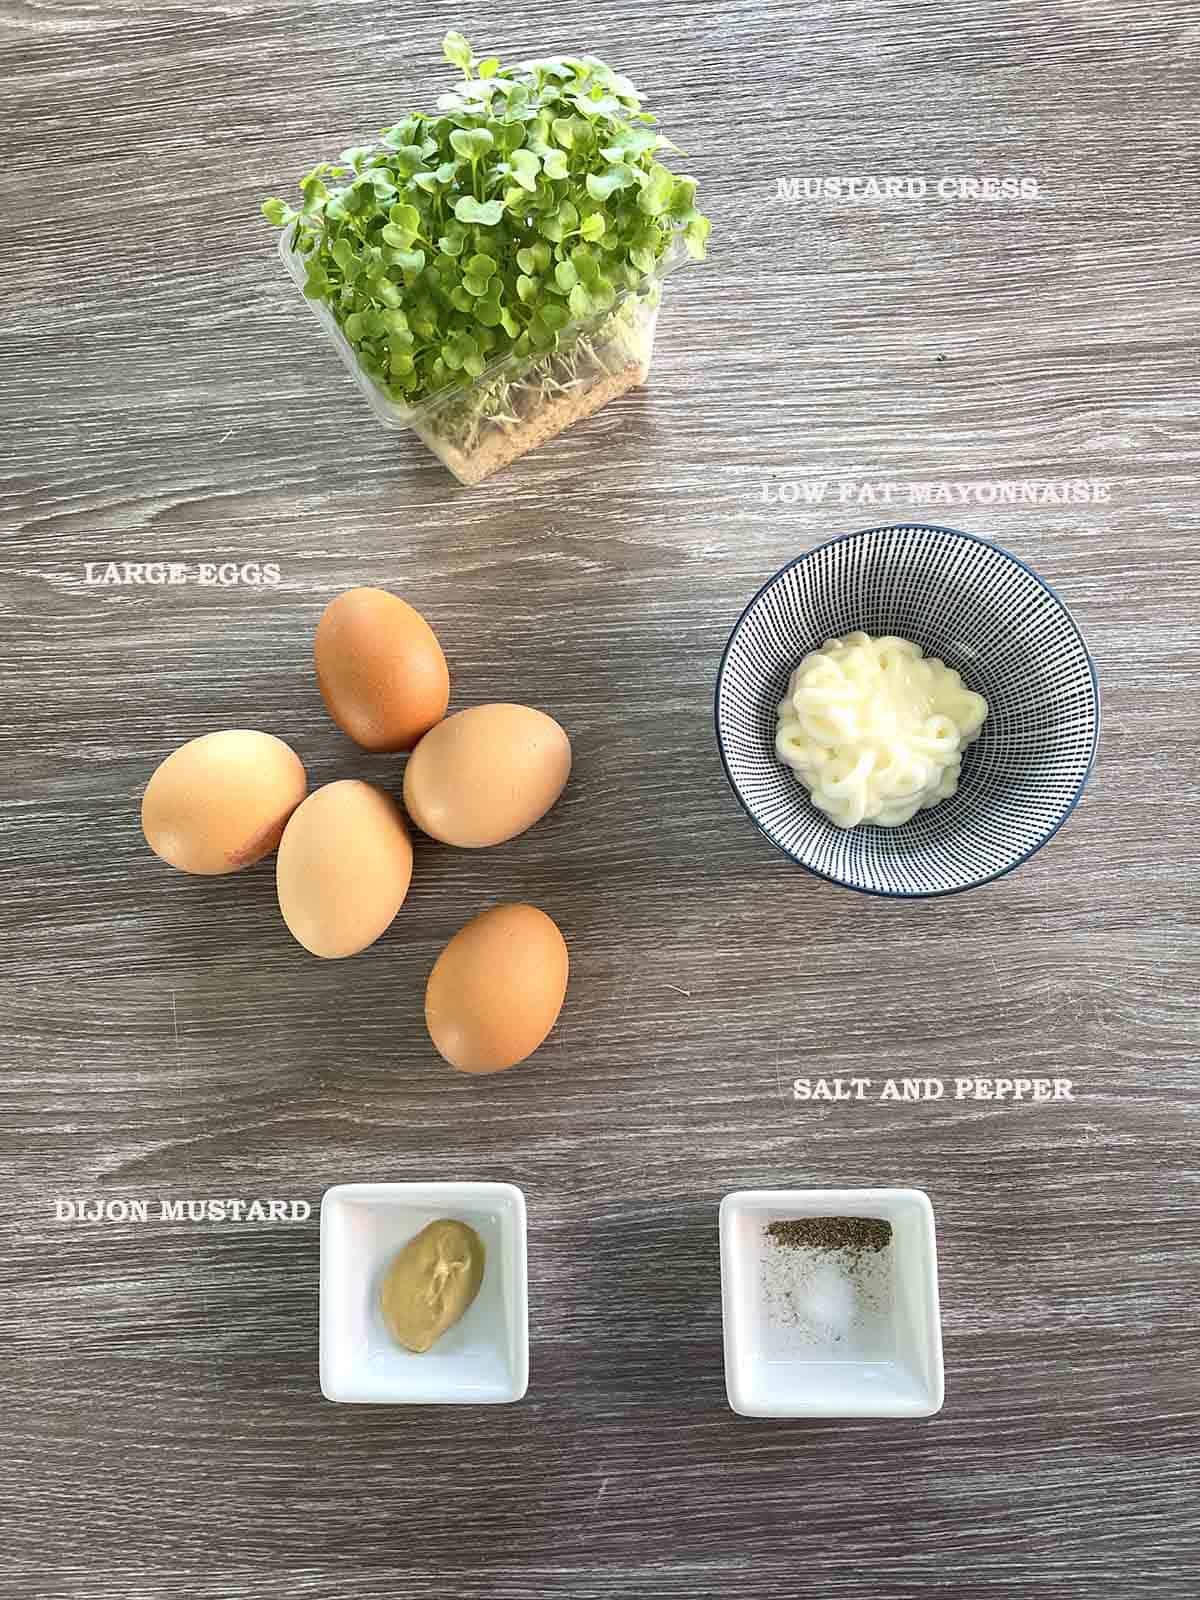 ingredients including eggs and mayonnaise.